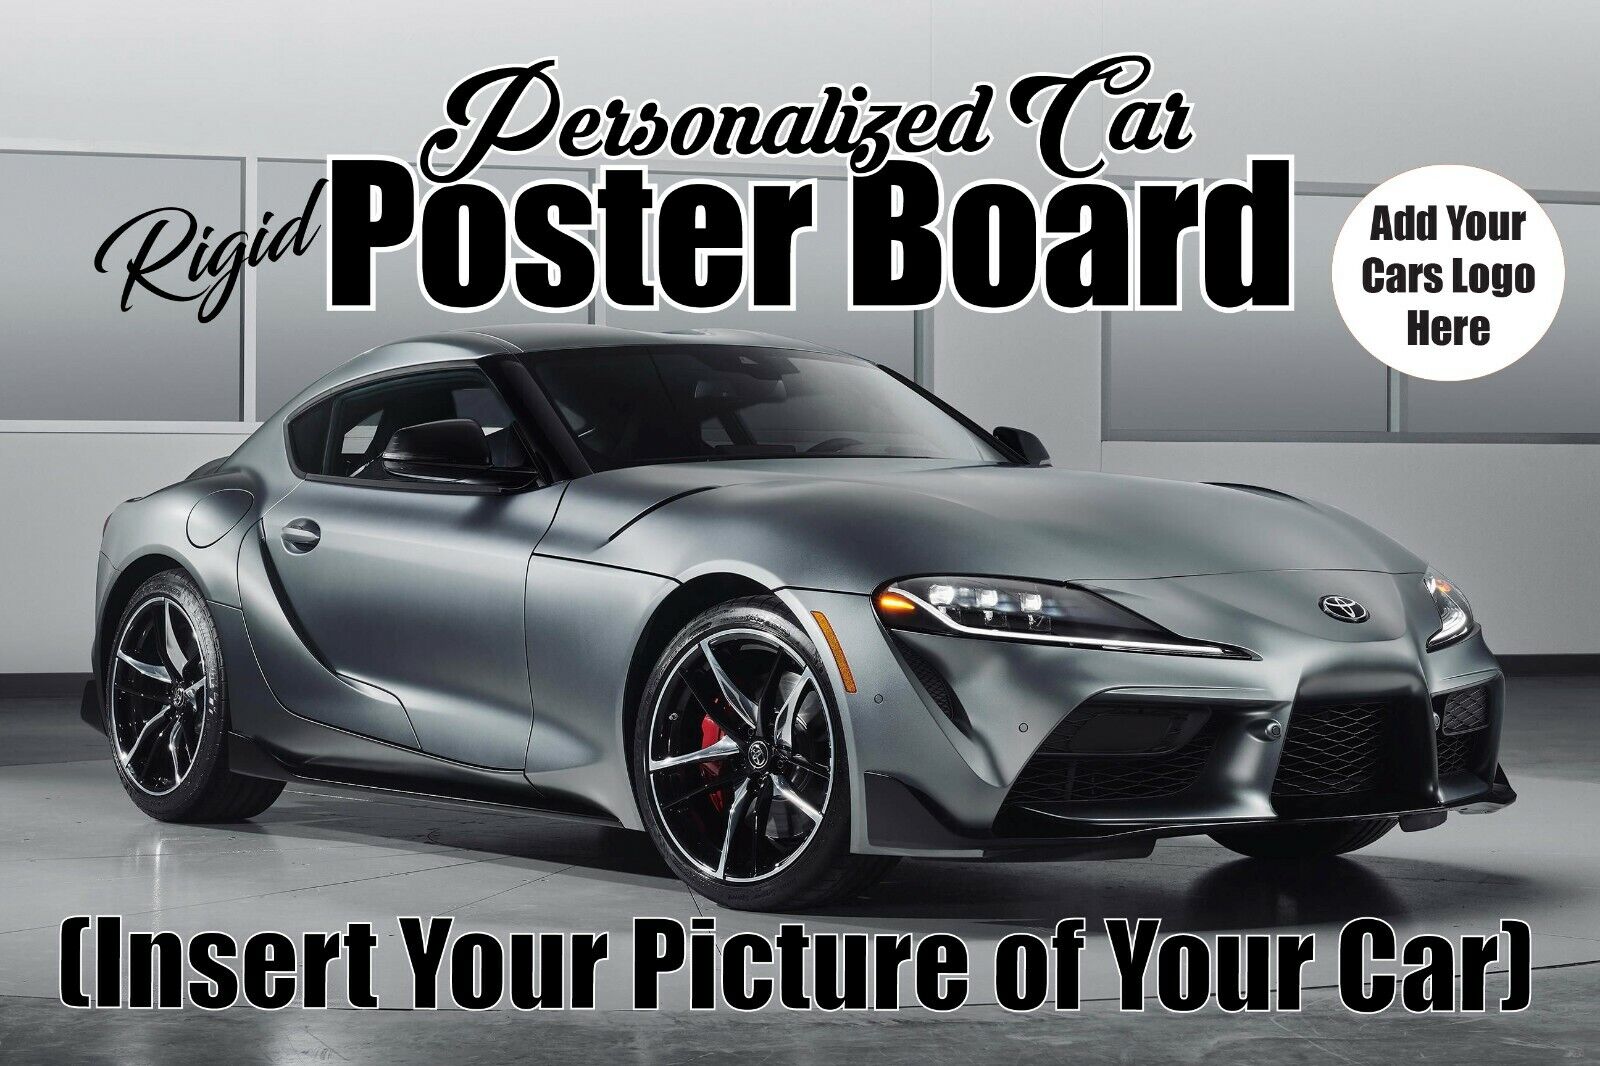 Personalized Car Posterboard 2'x3' Custom Picture of Your Car & info Car Shows